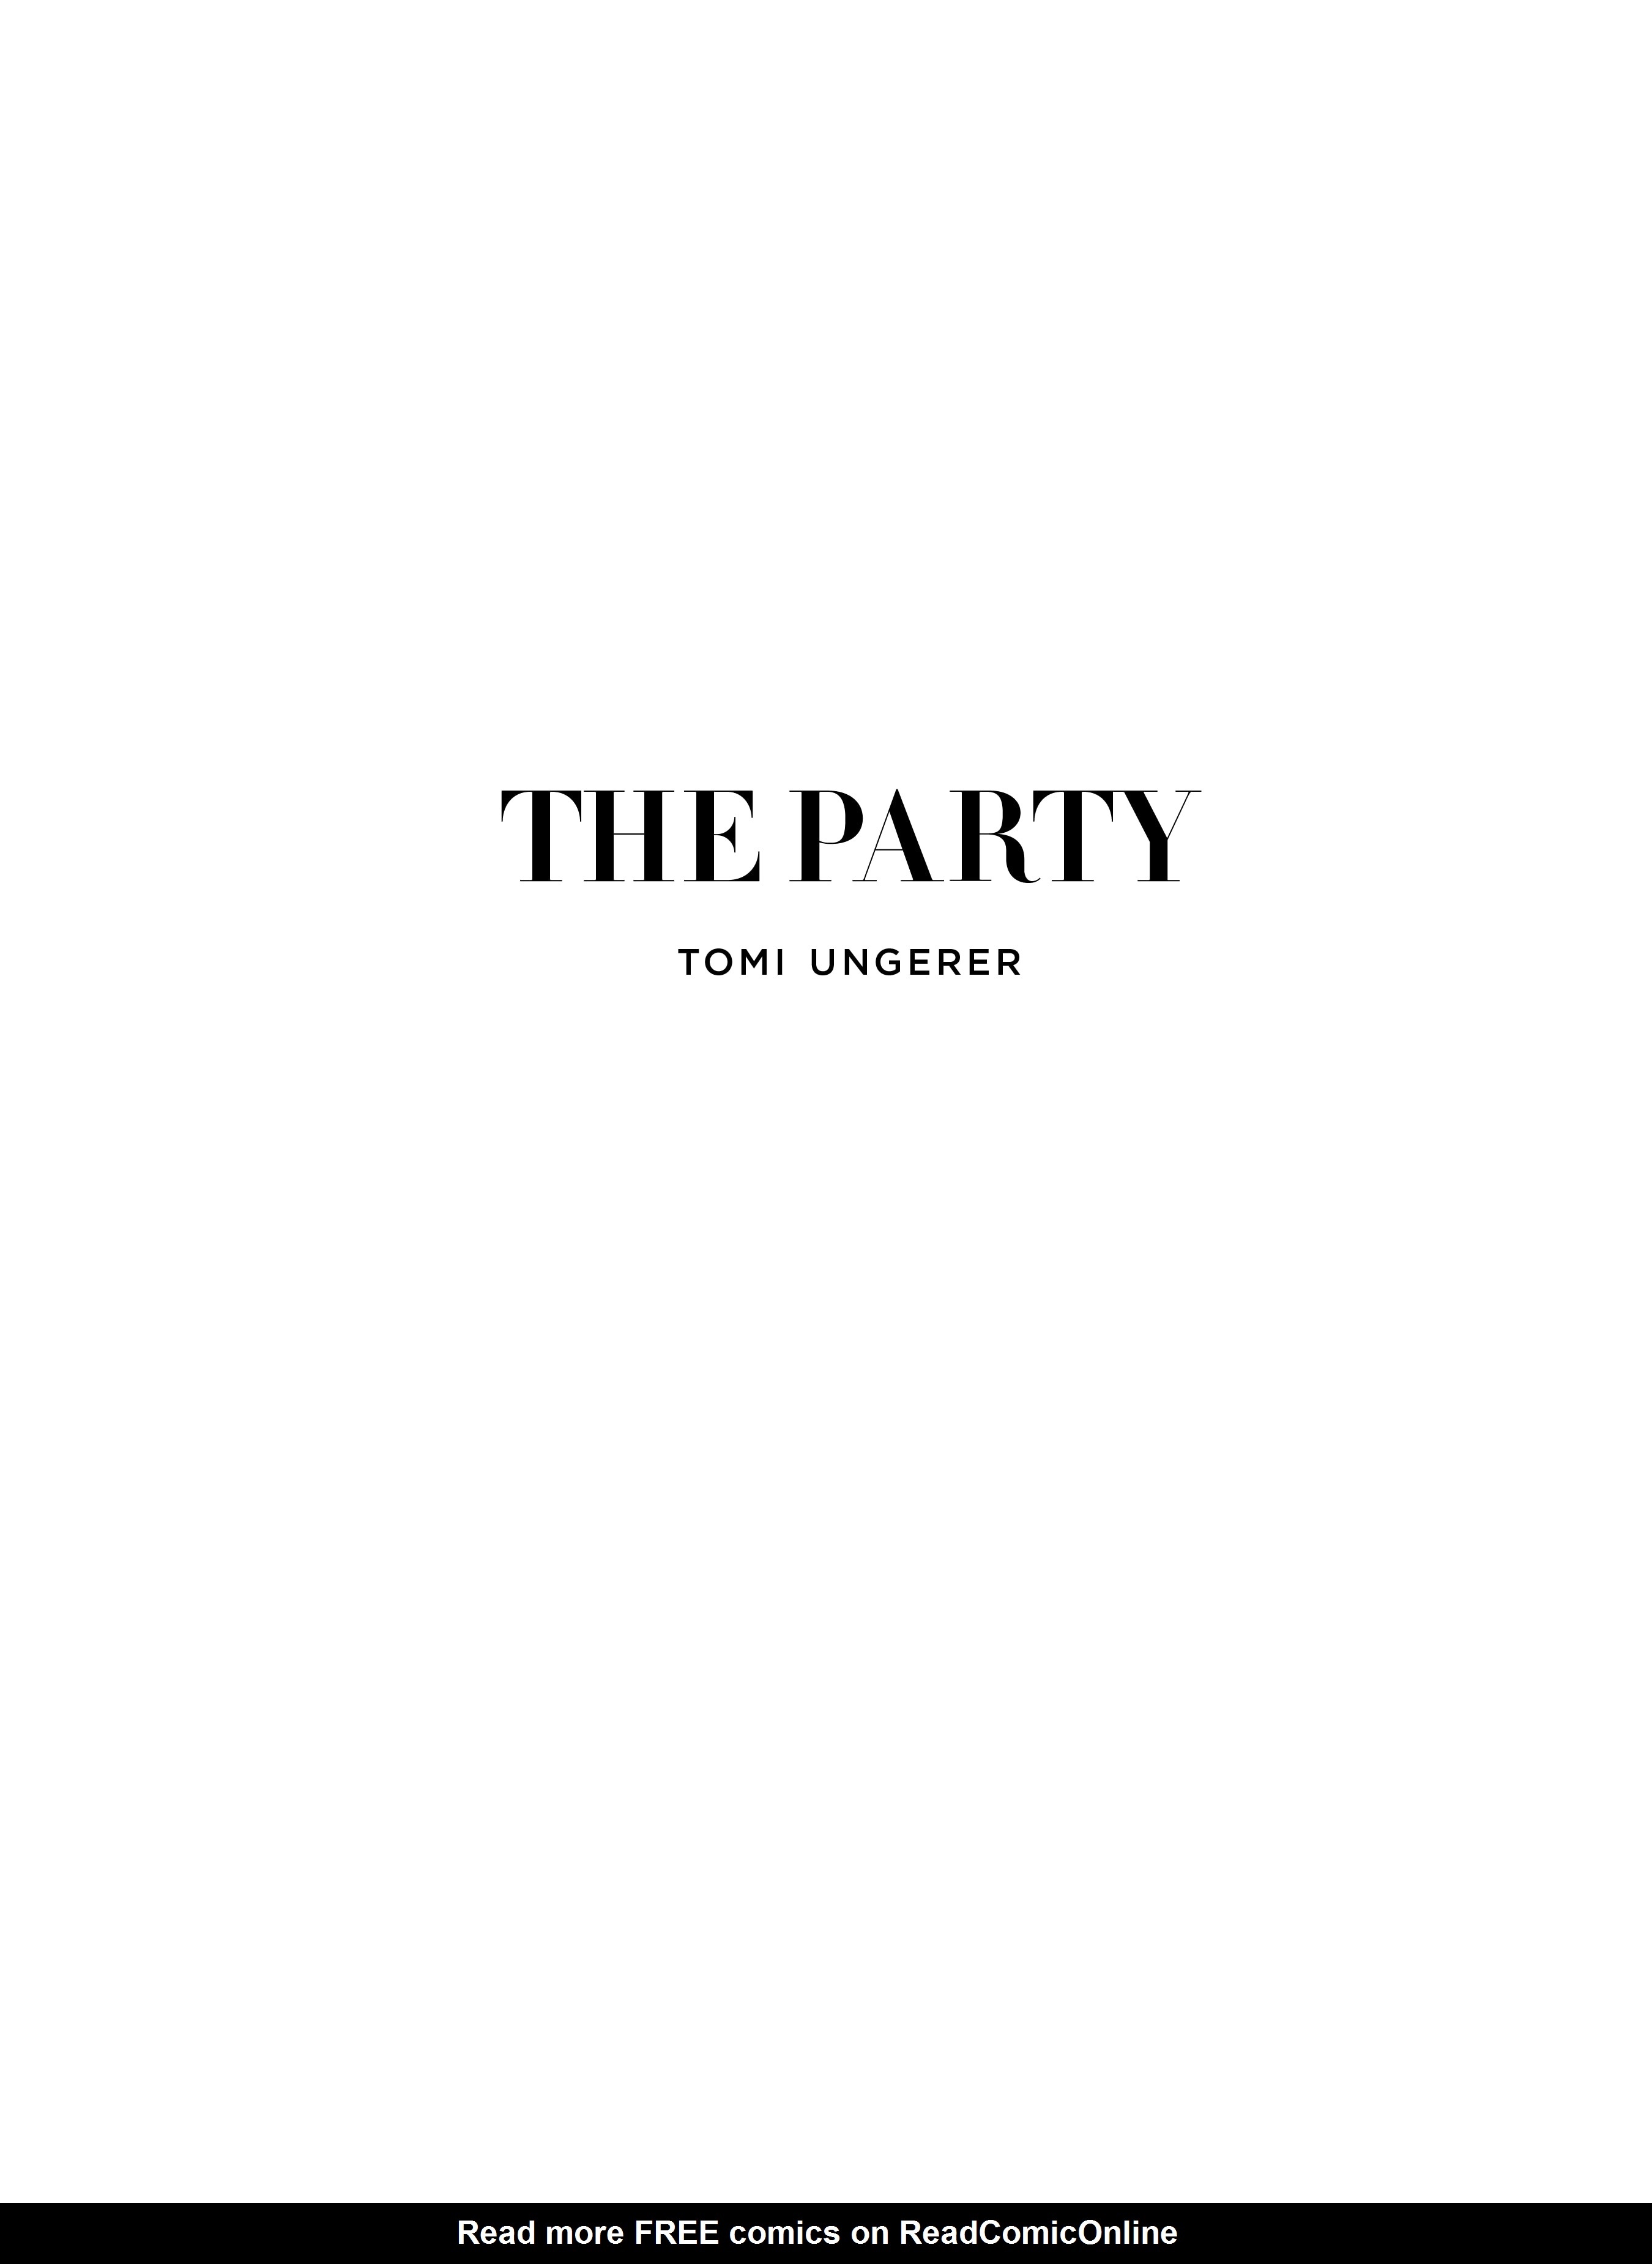 Read online The Party comic -  Issue # TPB - 2